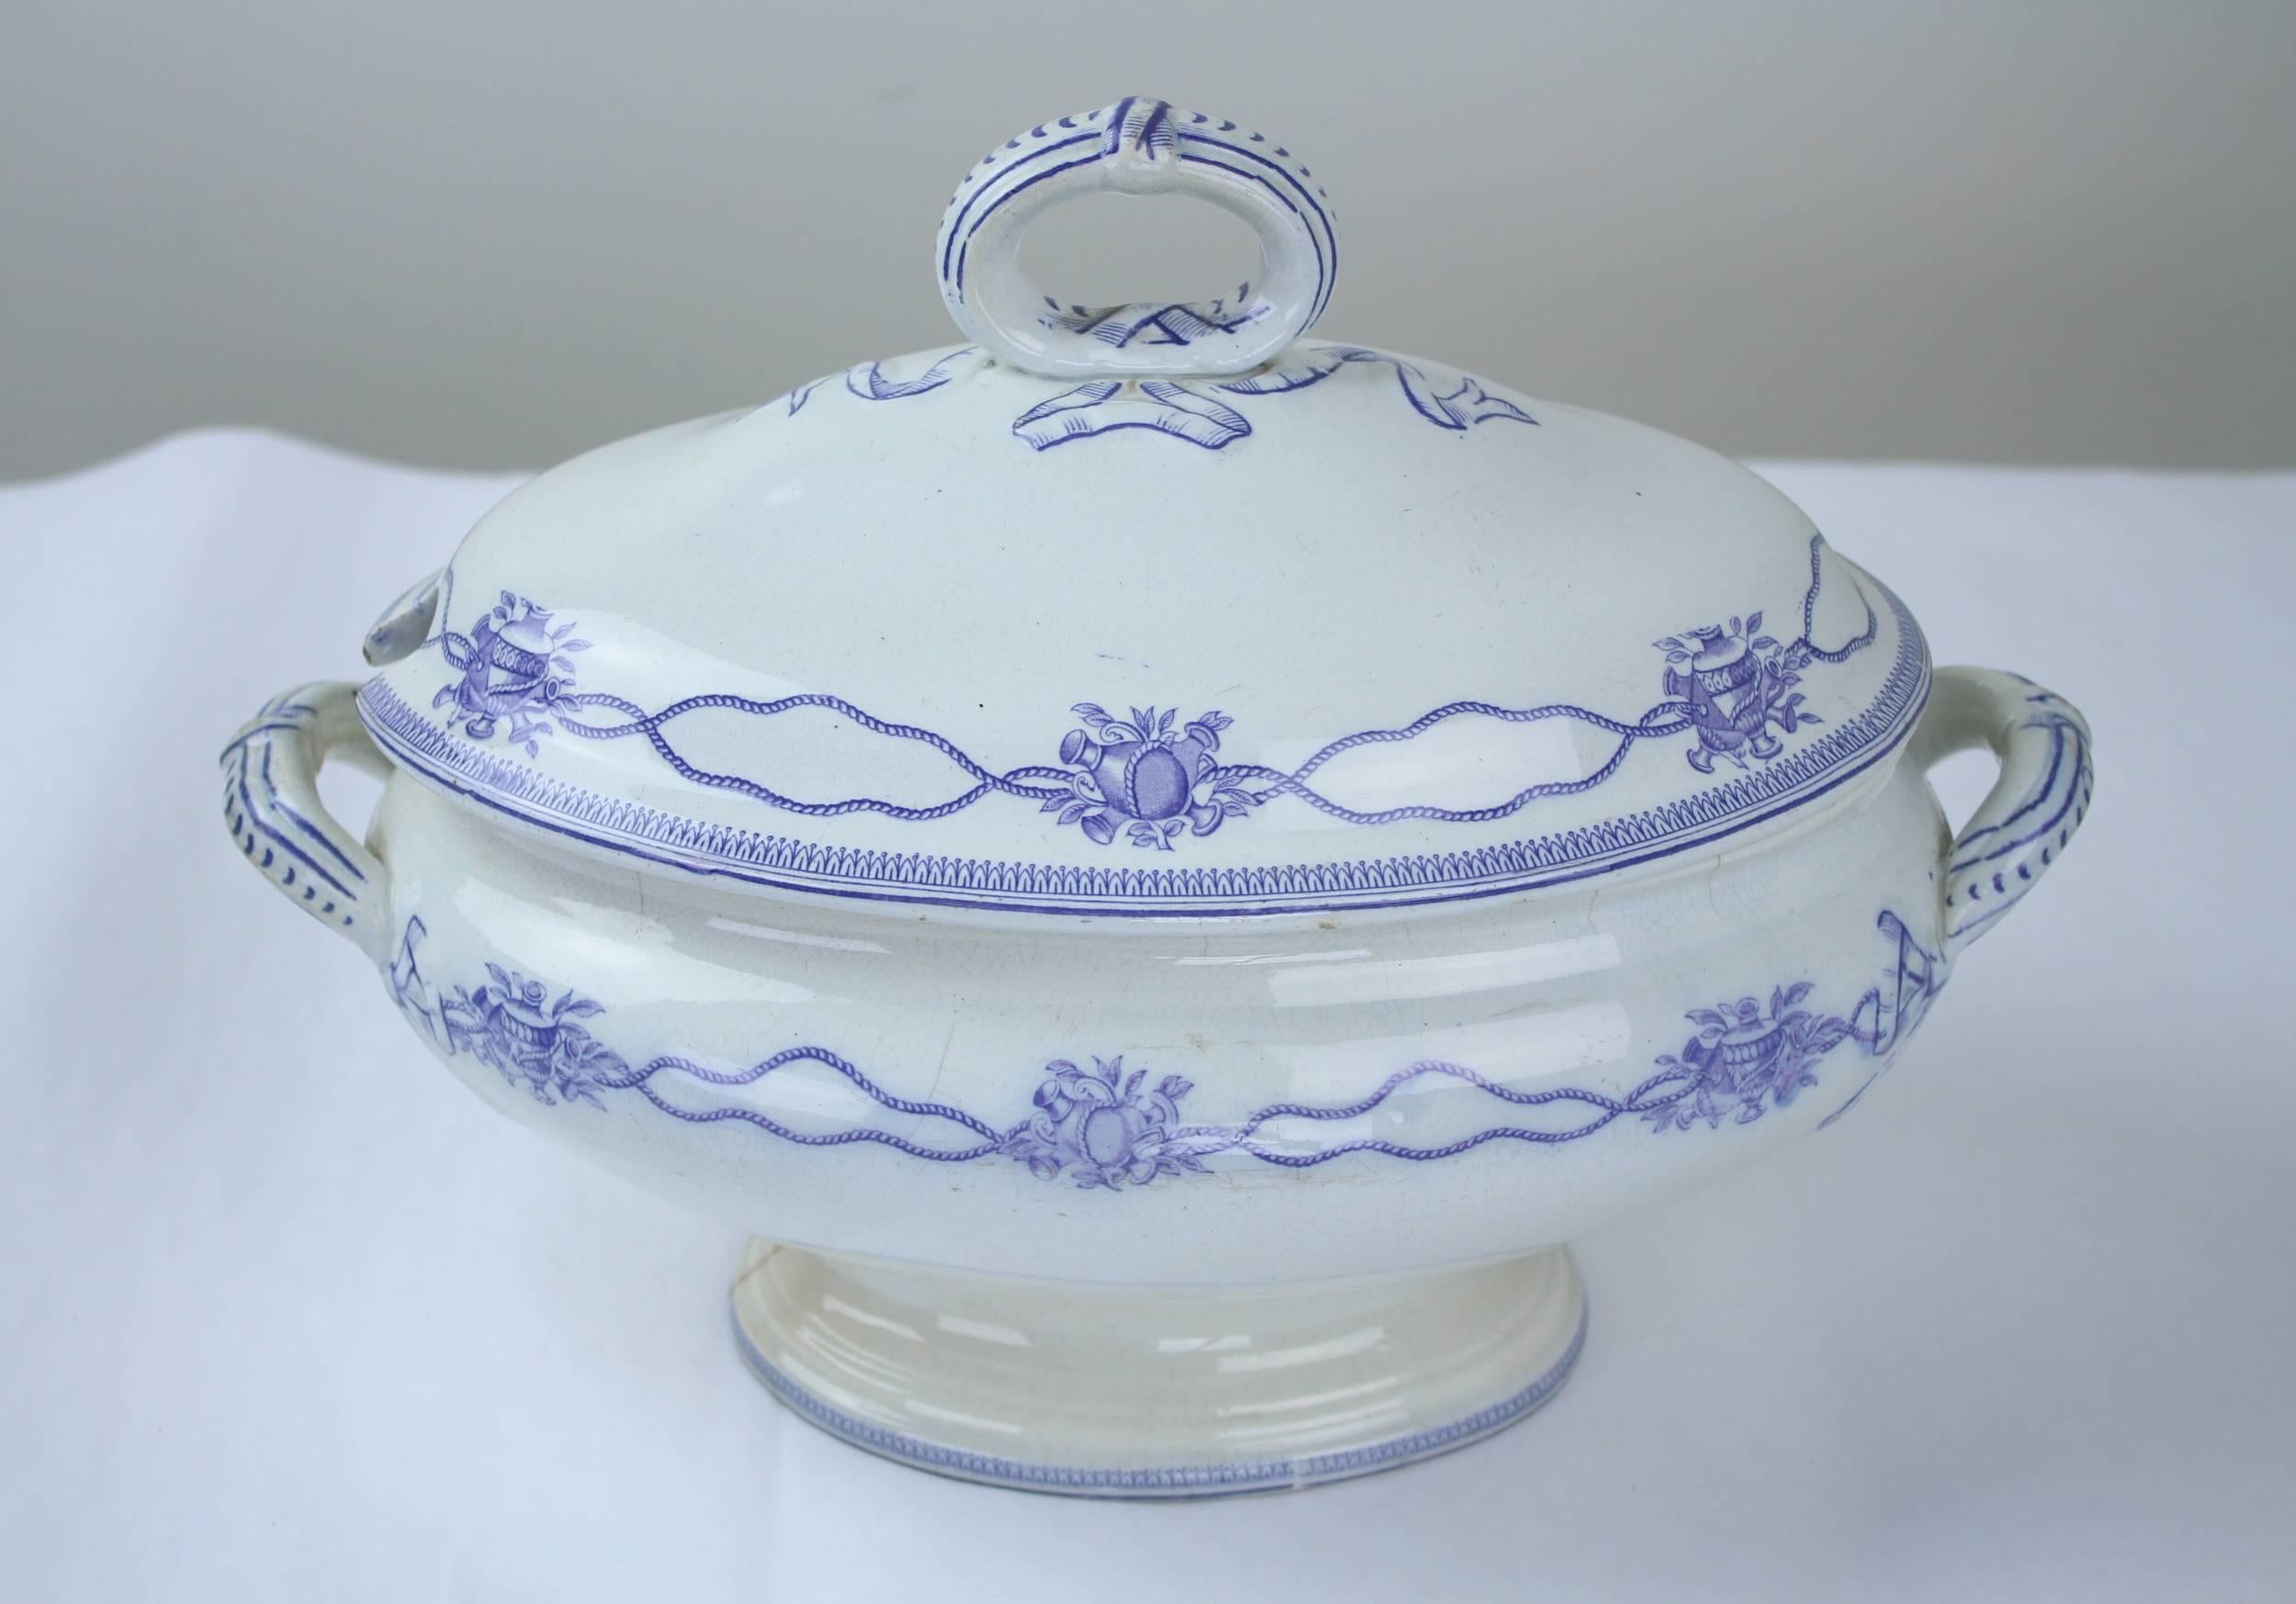 A mid-19th century pottery soup tureen with a blue ribbon pattern and looped handle. Highly decorative, but sadly without its original ladle. There is a 